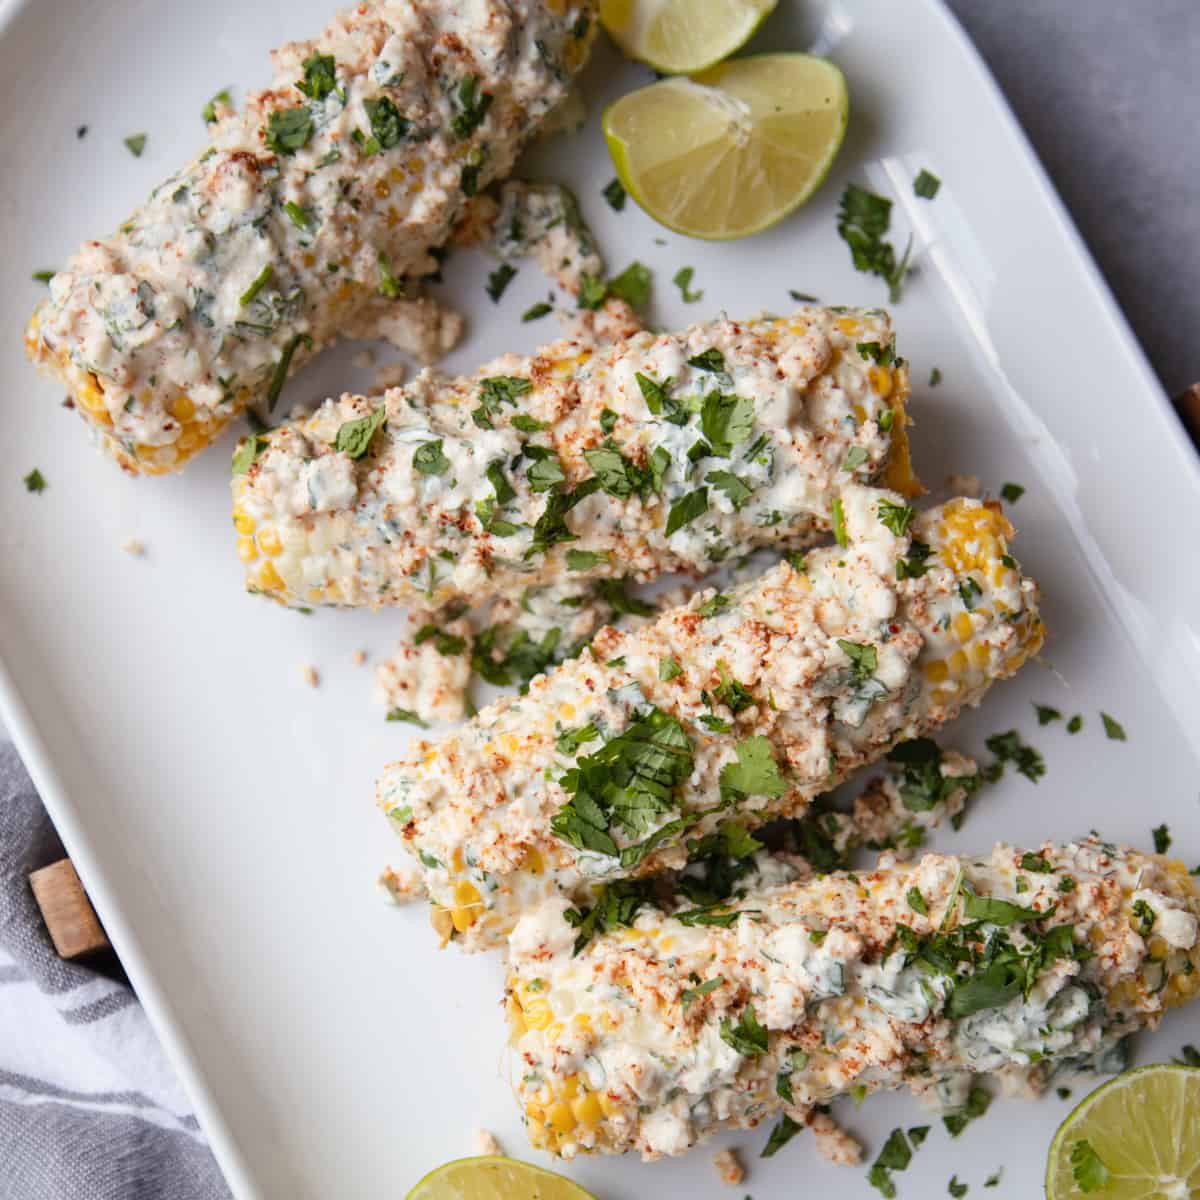 A plate of Mexican street corn topped with cilantro and garnished with lime slices on the side.